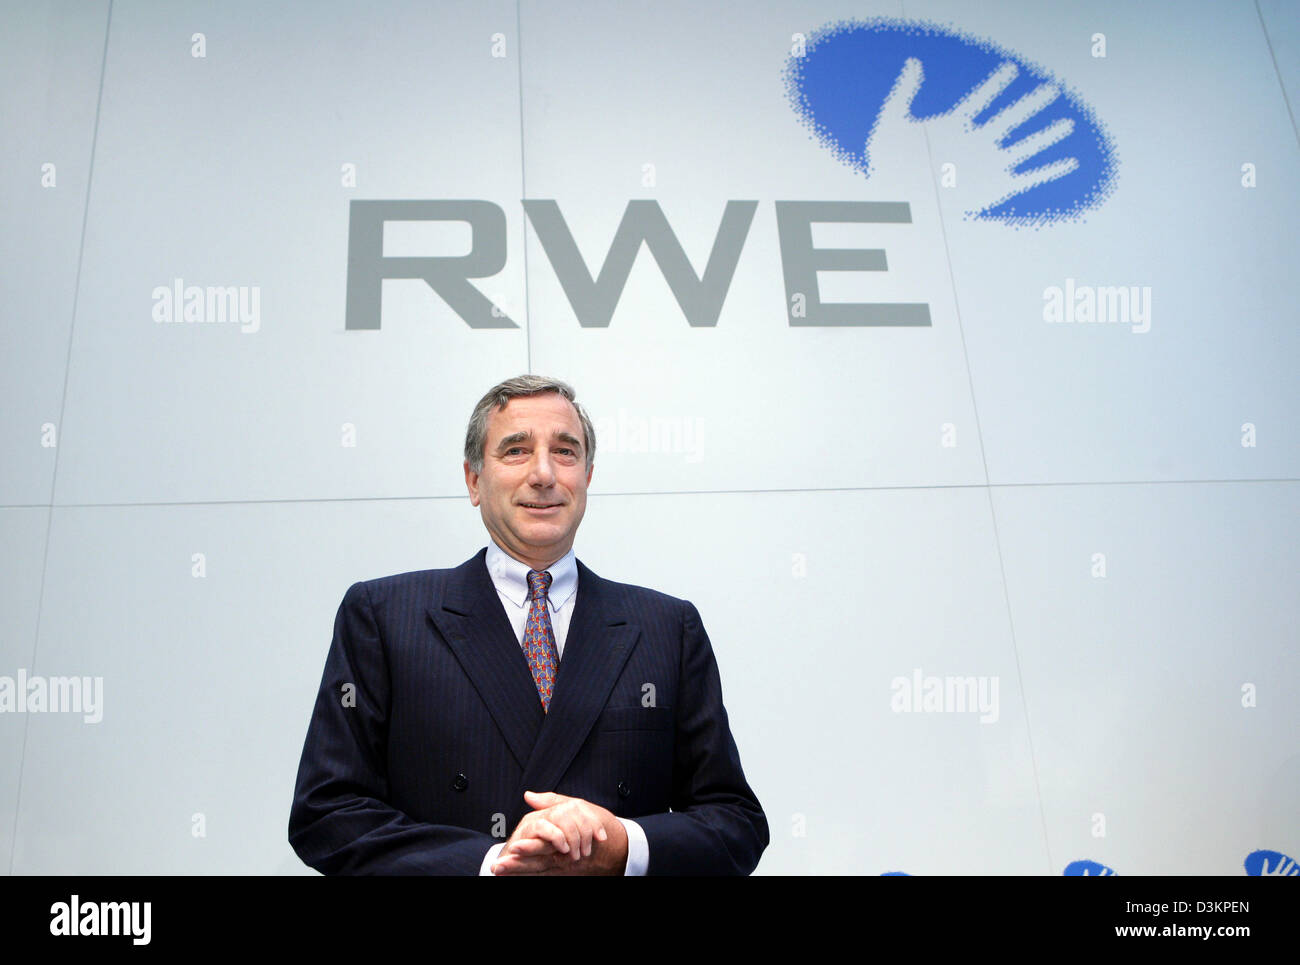 (dpa) - Harry Roels, chairman of energy company RWE, stands underneath the company logo during a press conference in Essen, Germany, Thursday, 11 August 2005. RWE continued the positive trend in business results from the first half term. The operational results increased in comparison to the previous year values by five percent to 3,455 million euros. Photo: Rolf Vennenbernd Stock Photo